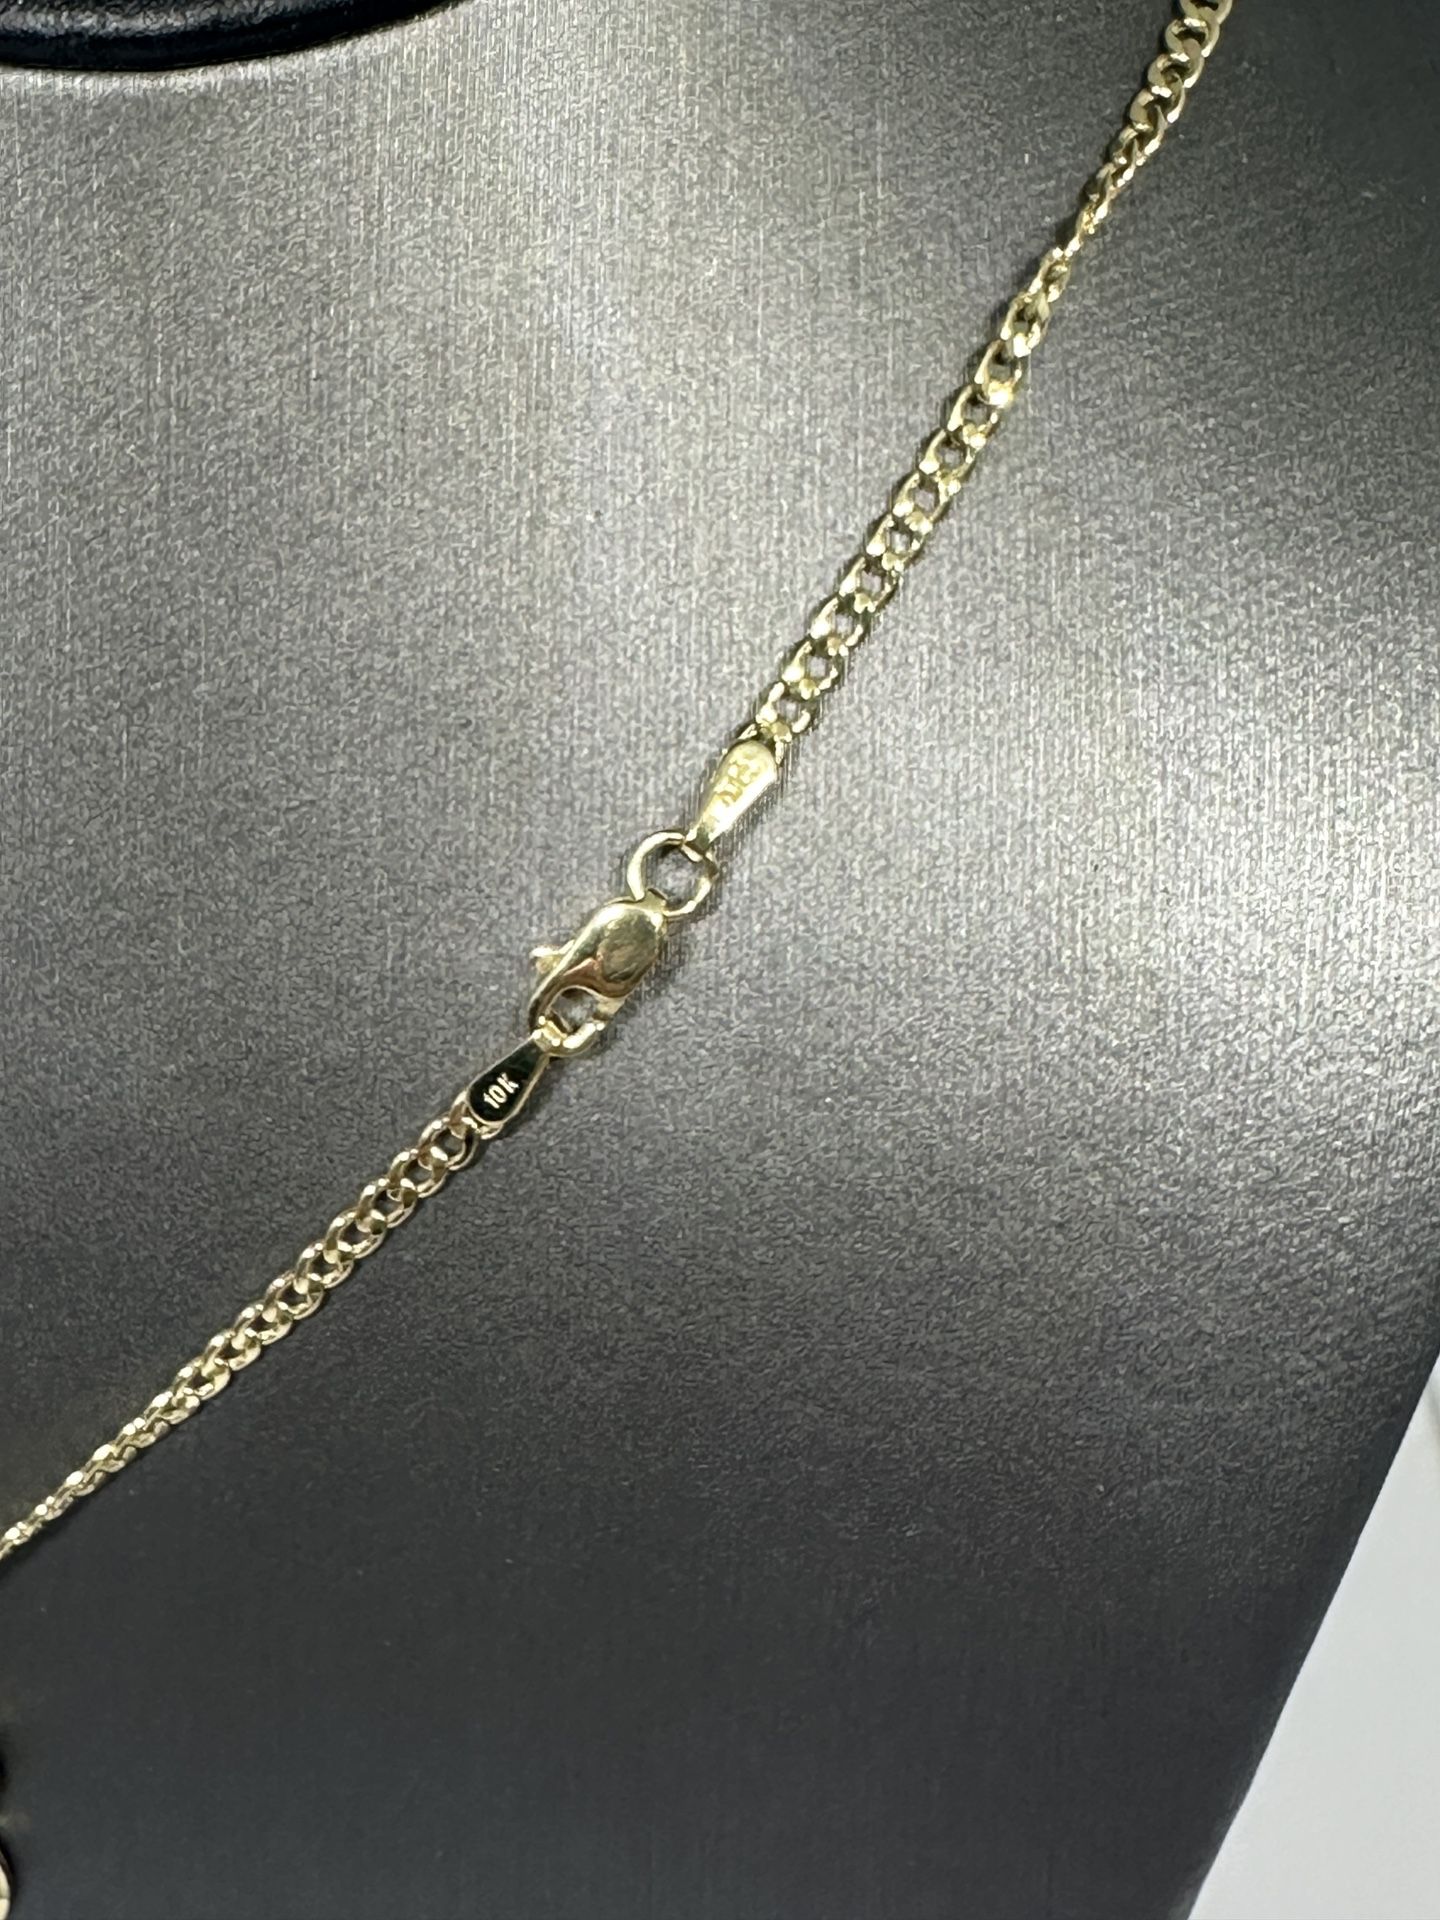 10kt Yellow Gold Initial Pendant Necklace 